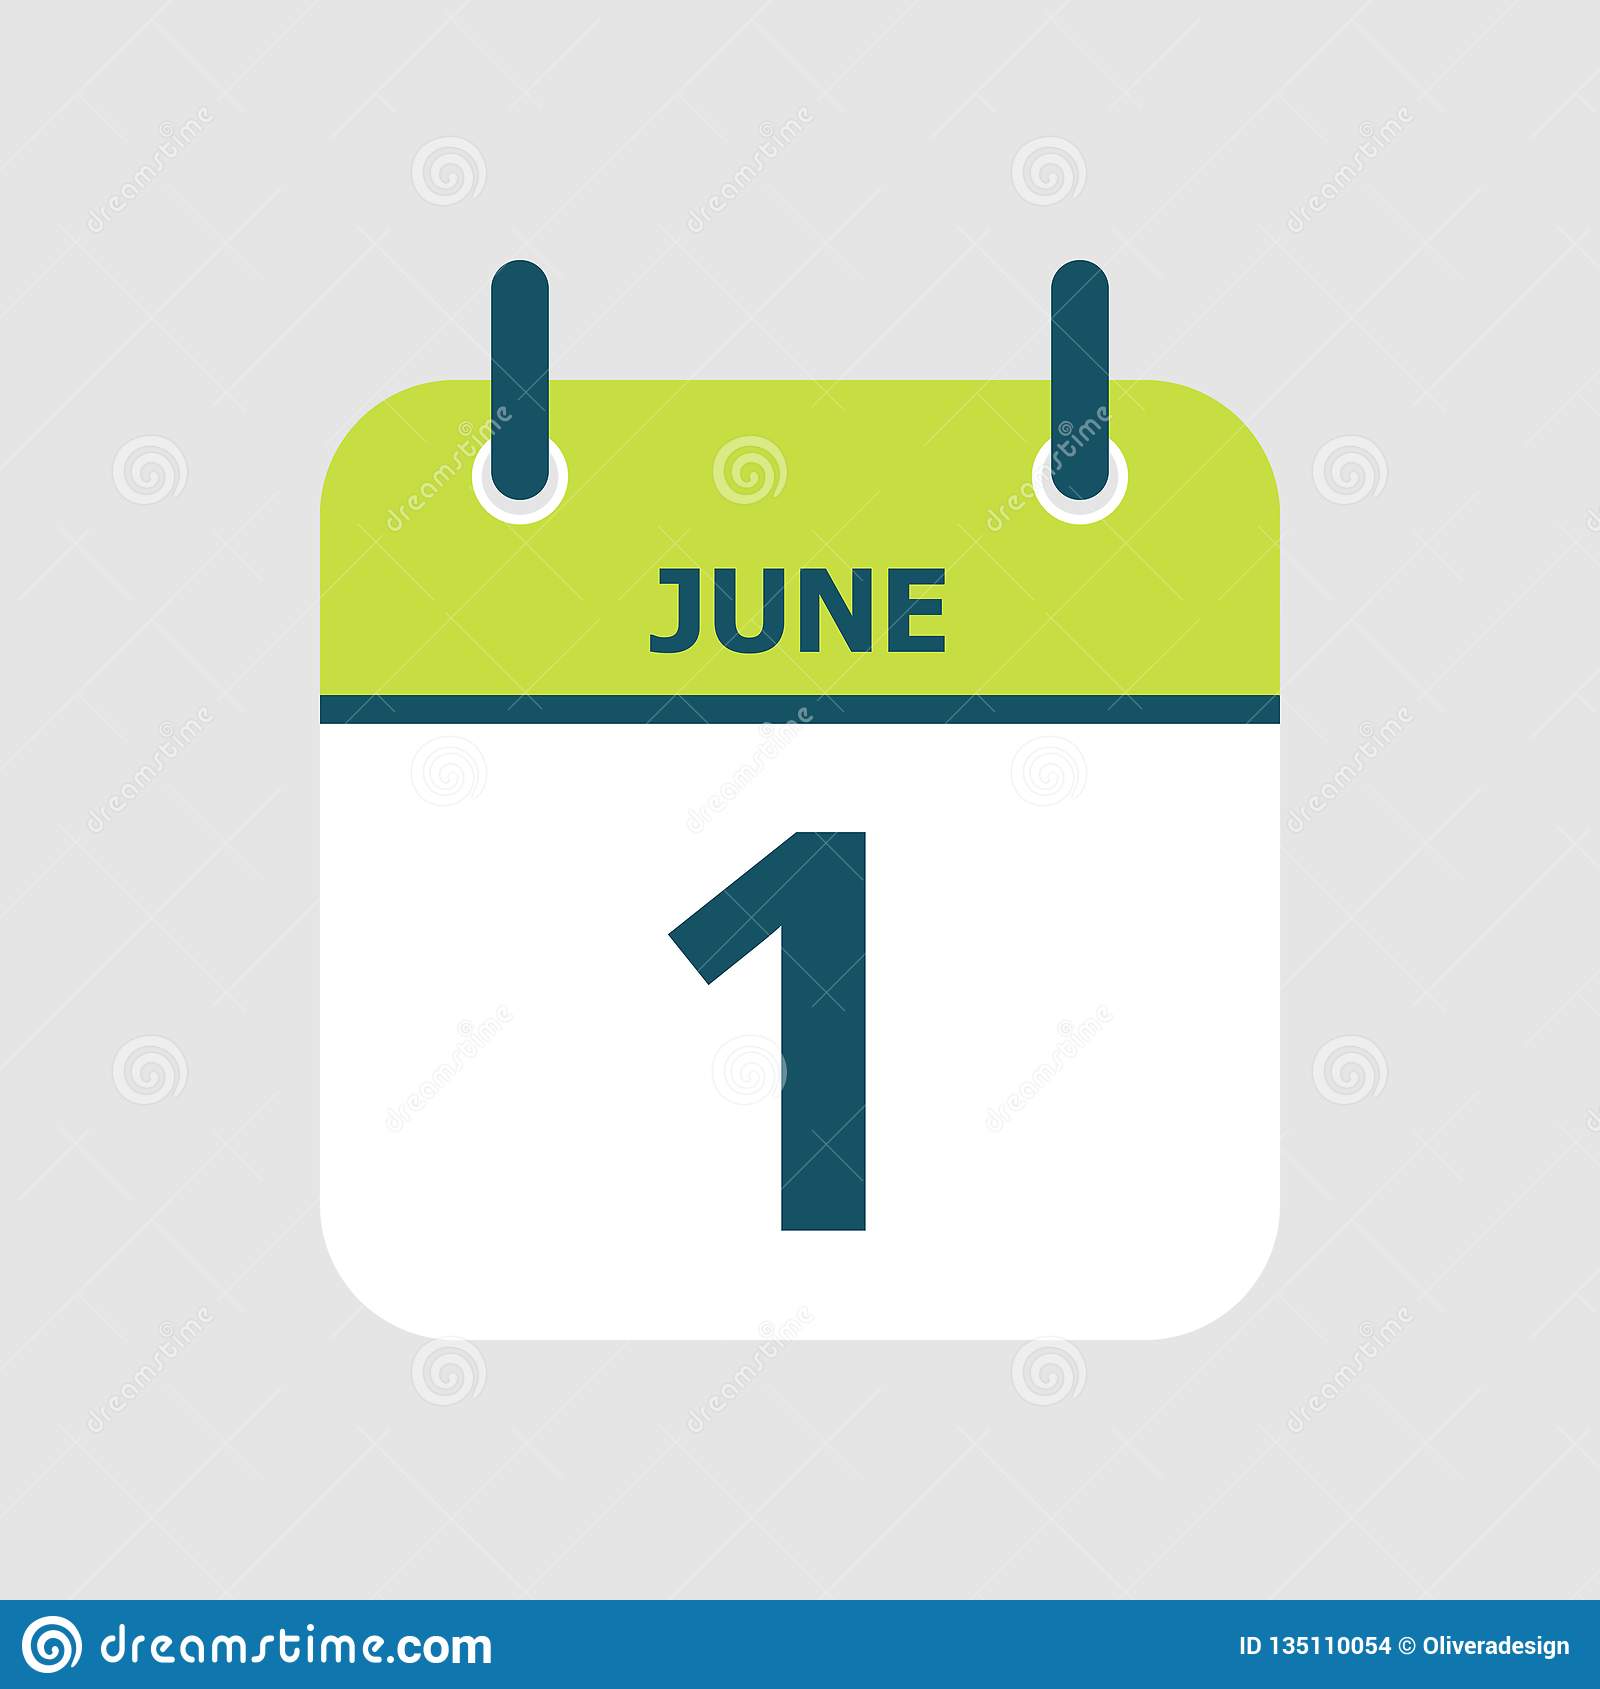 St. Therese Academy Thursday, June 1st events for 8th grade LAST DAY